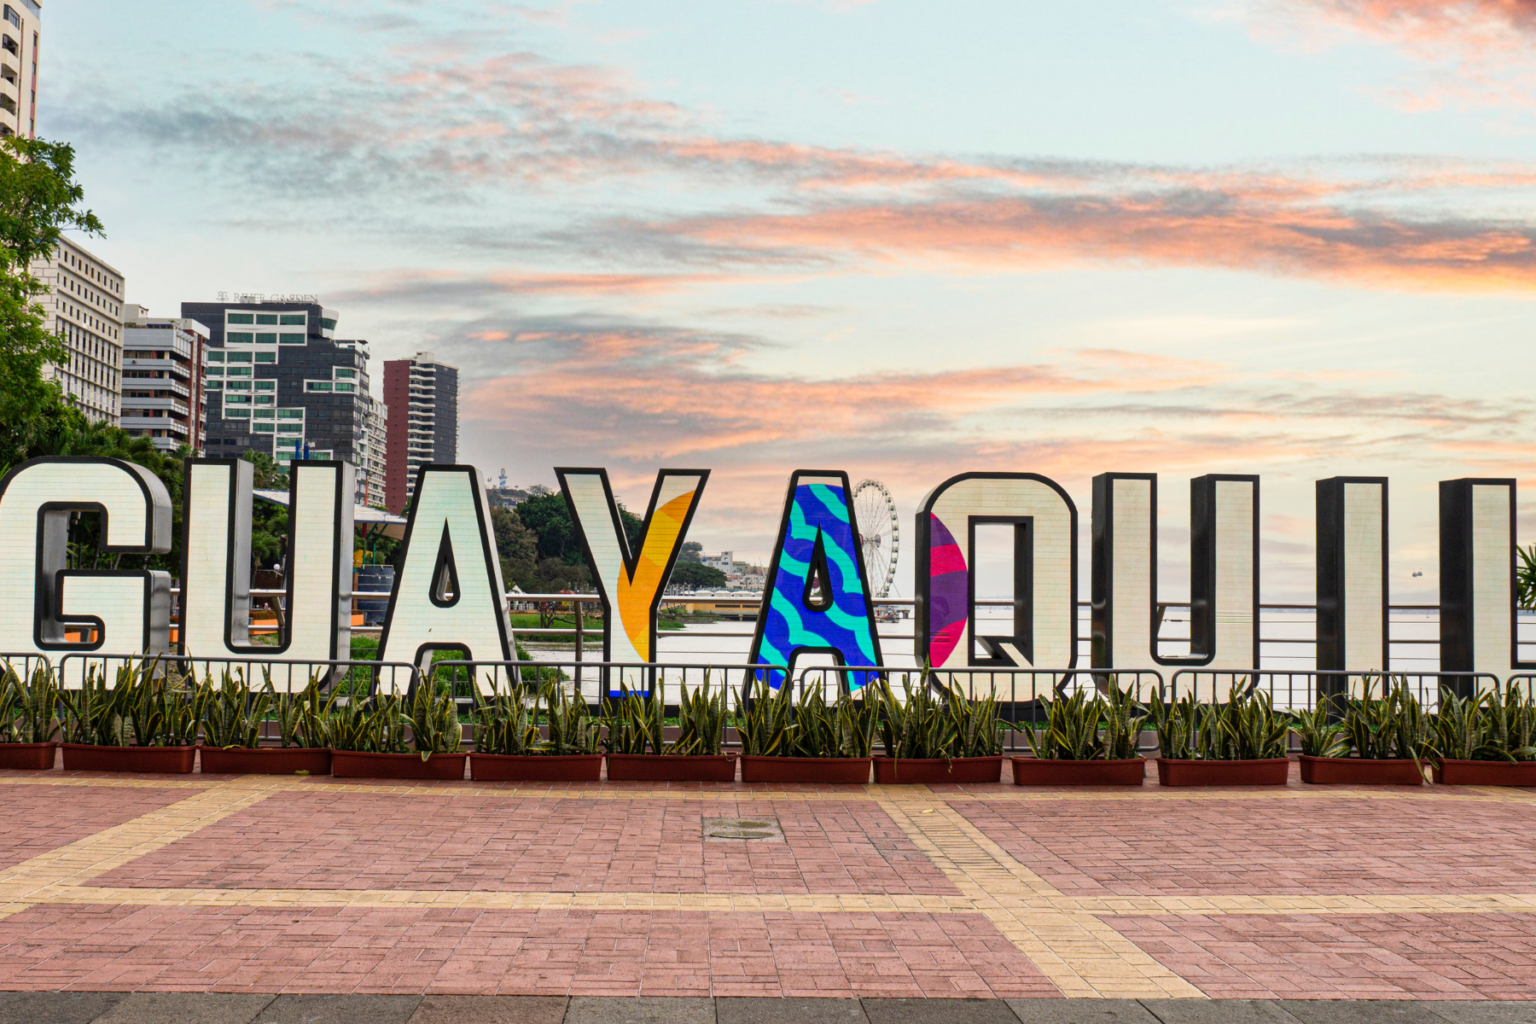 Large colorful Guayaquil city letters